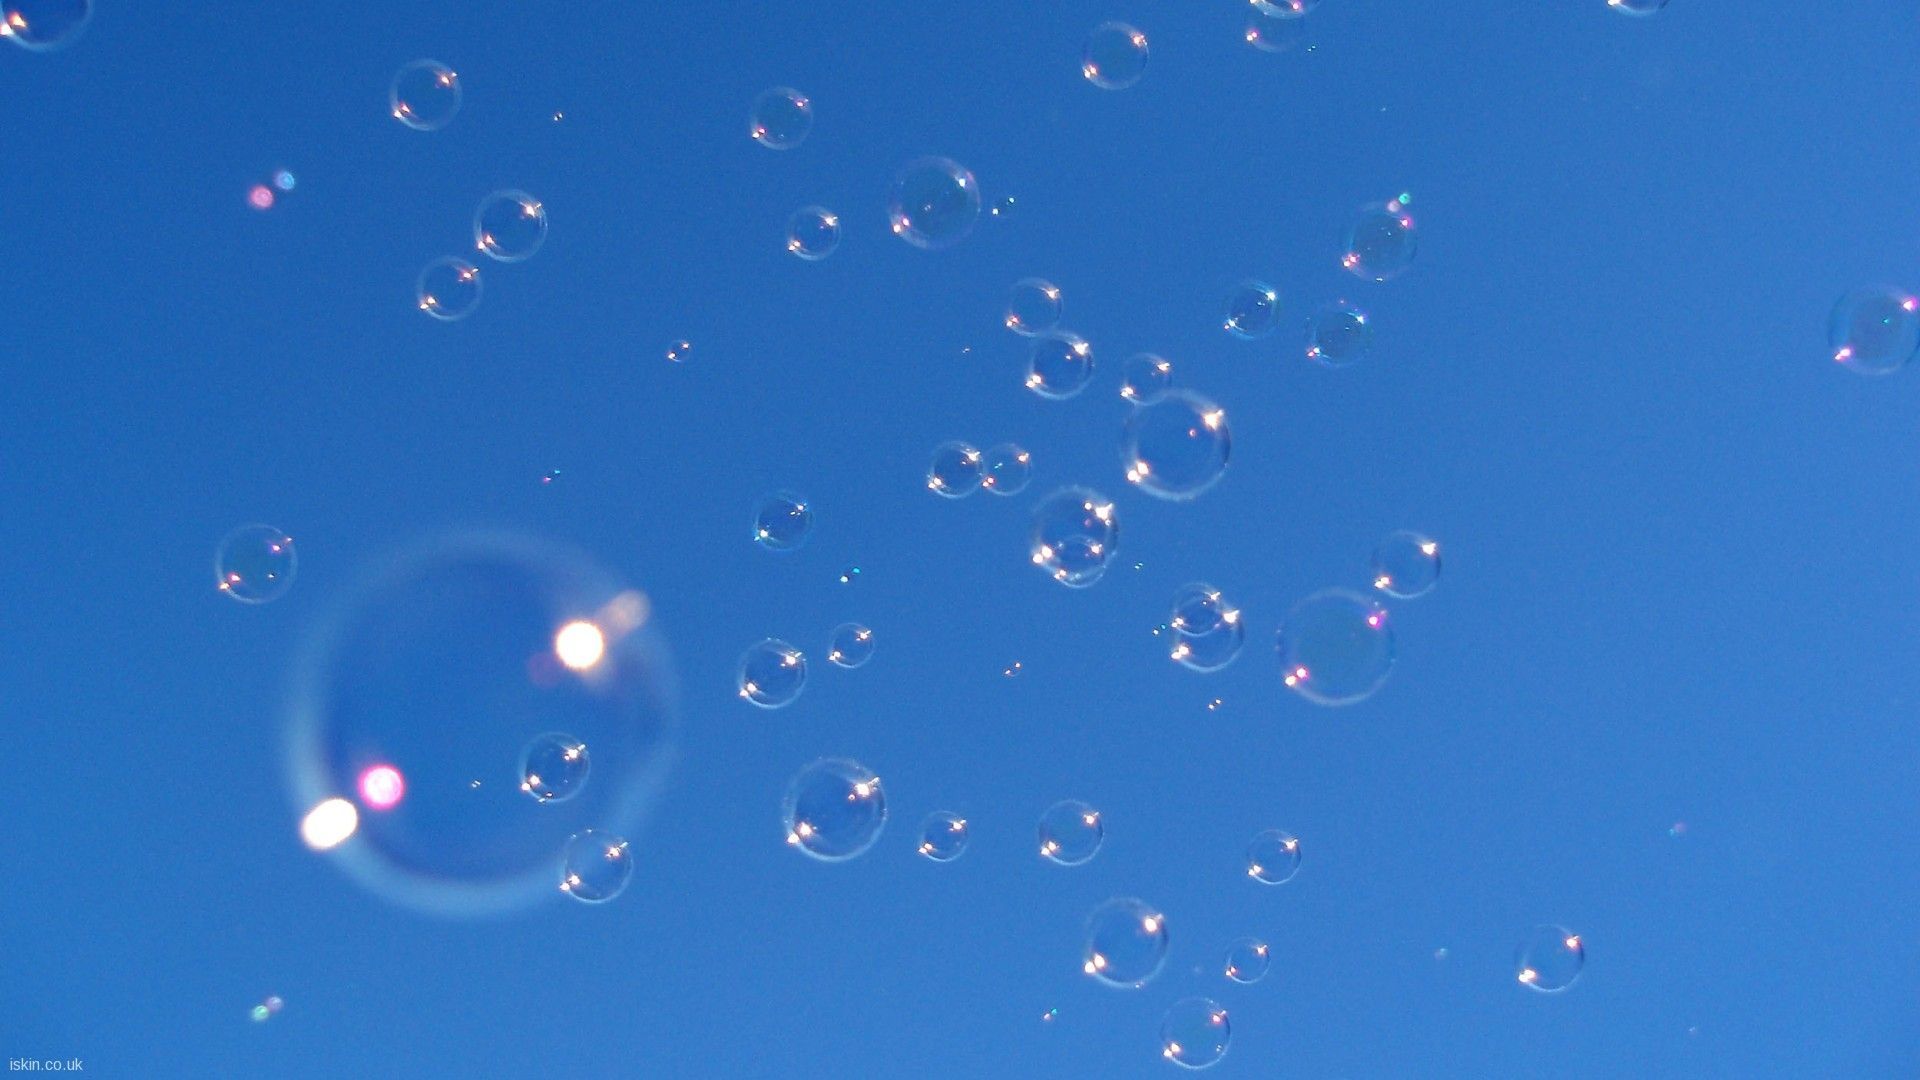 Soap bubbles floating in the air against a blue sky - Bubbles